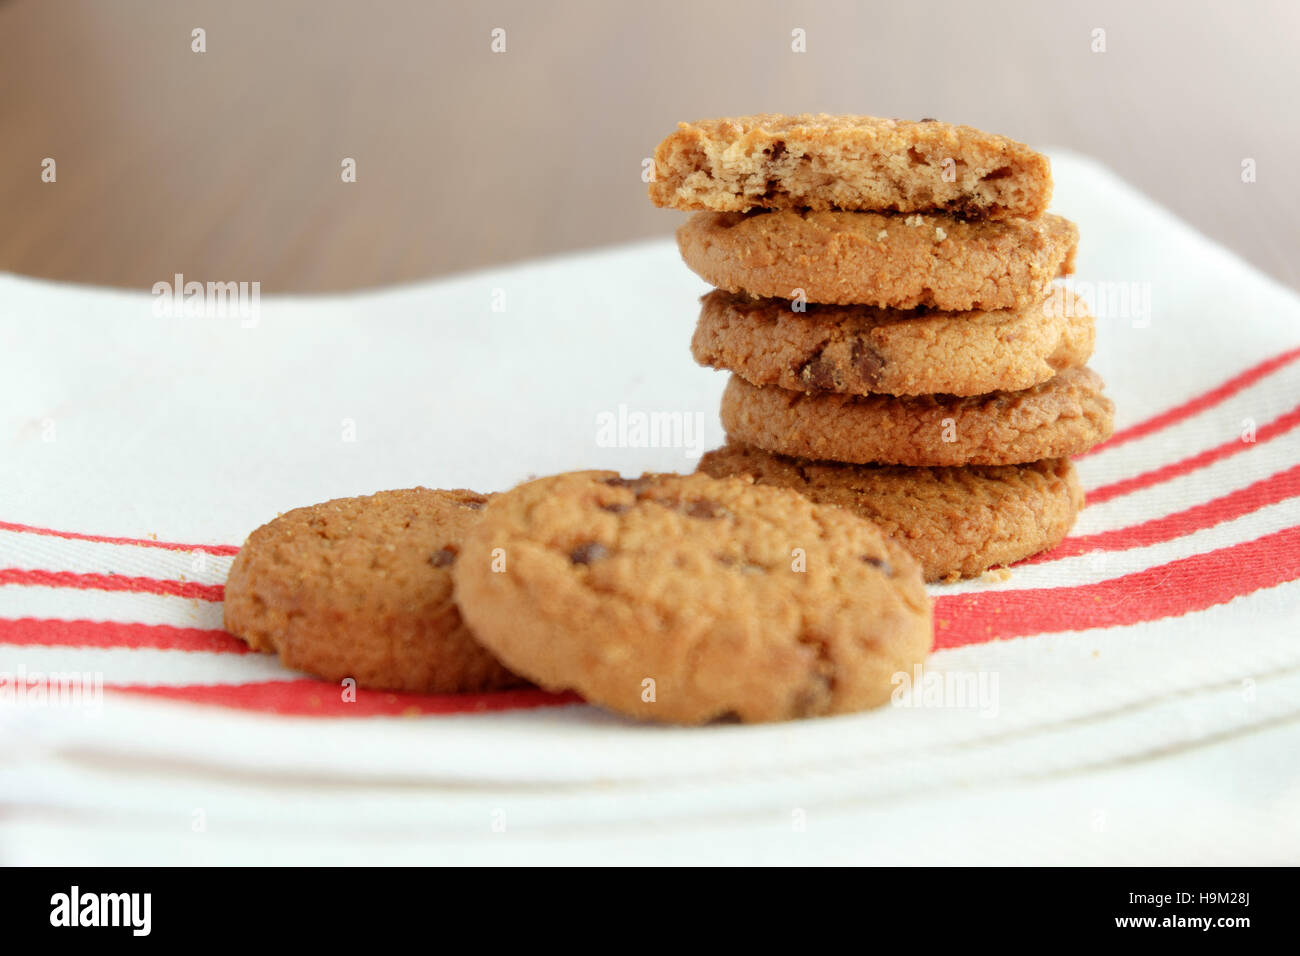 Chocolate chip cookies on white linen napkin on wooden tab, selective focus Stock Photo